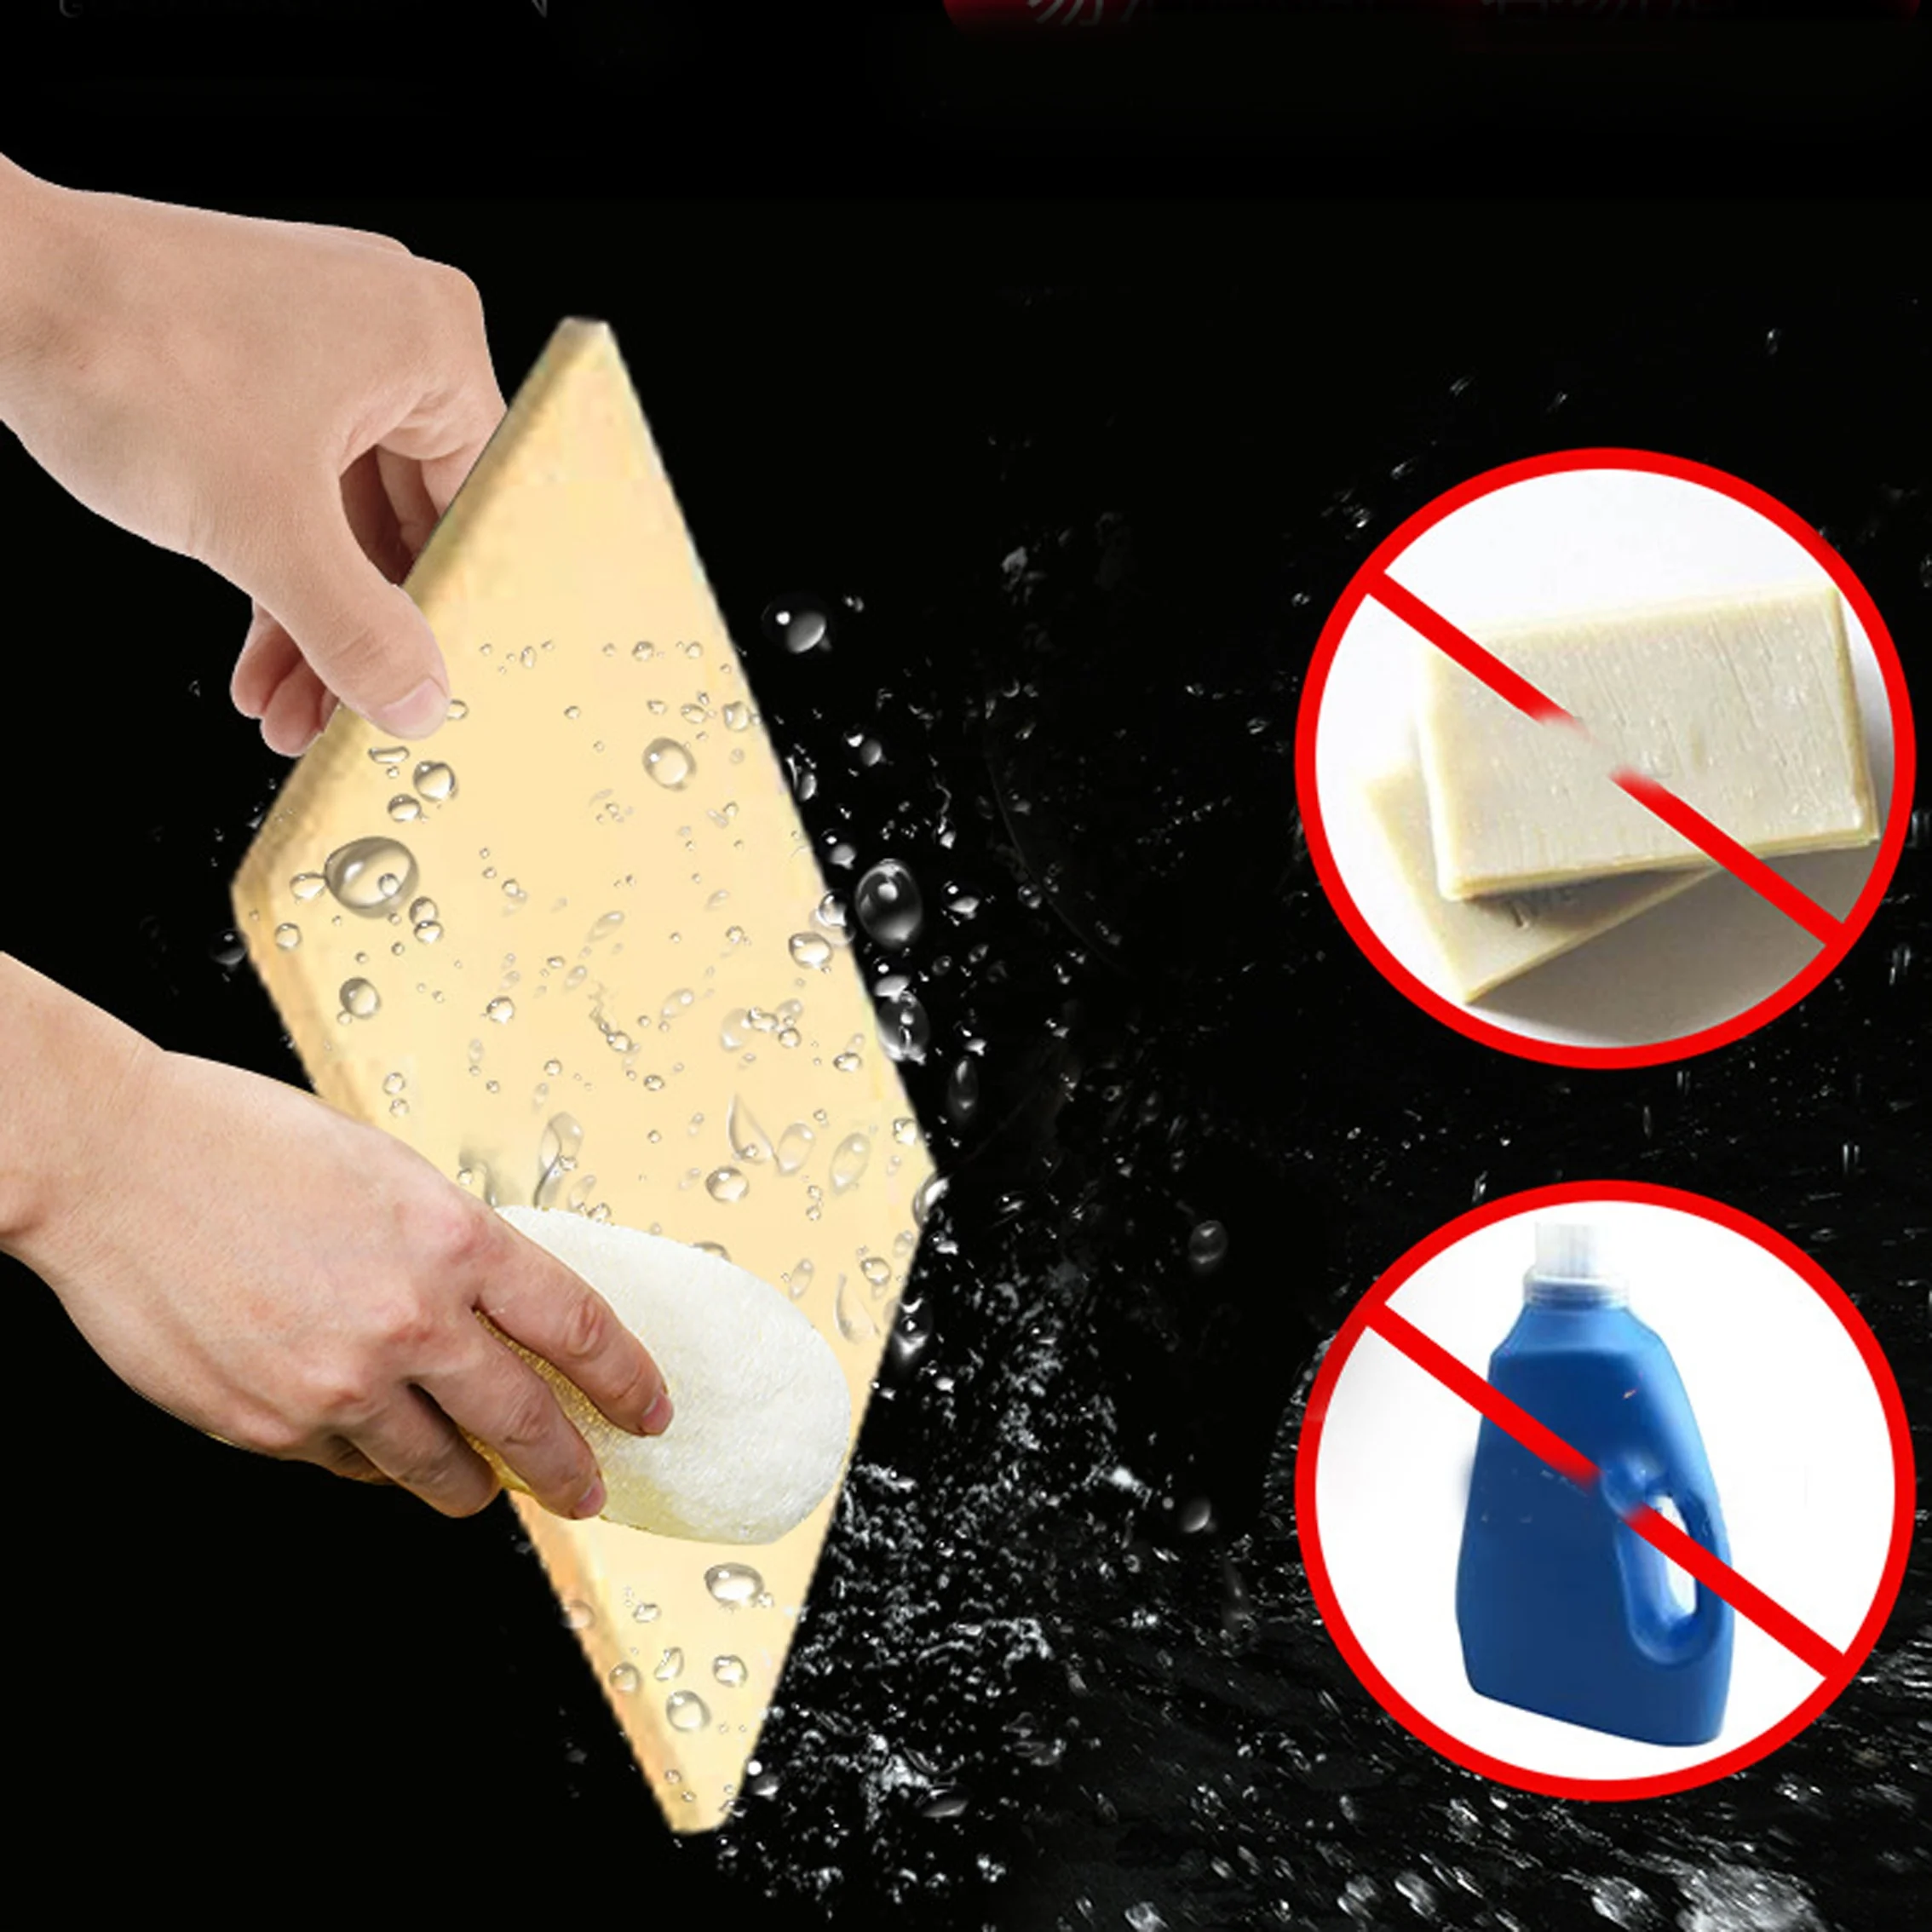 Hot Selling Rectangular Oven Stone Baking Stone Cordierite Pizza Stone Pizza Tools Kitchen Tools kitchen accessories